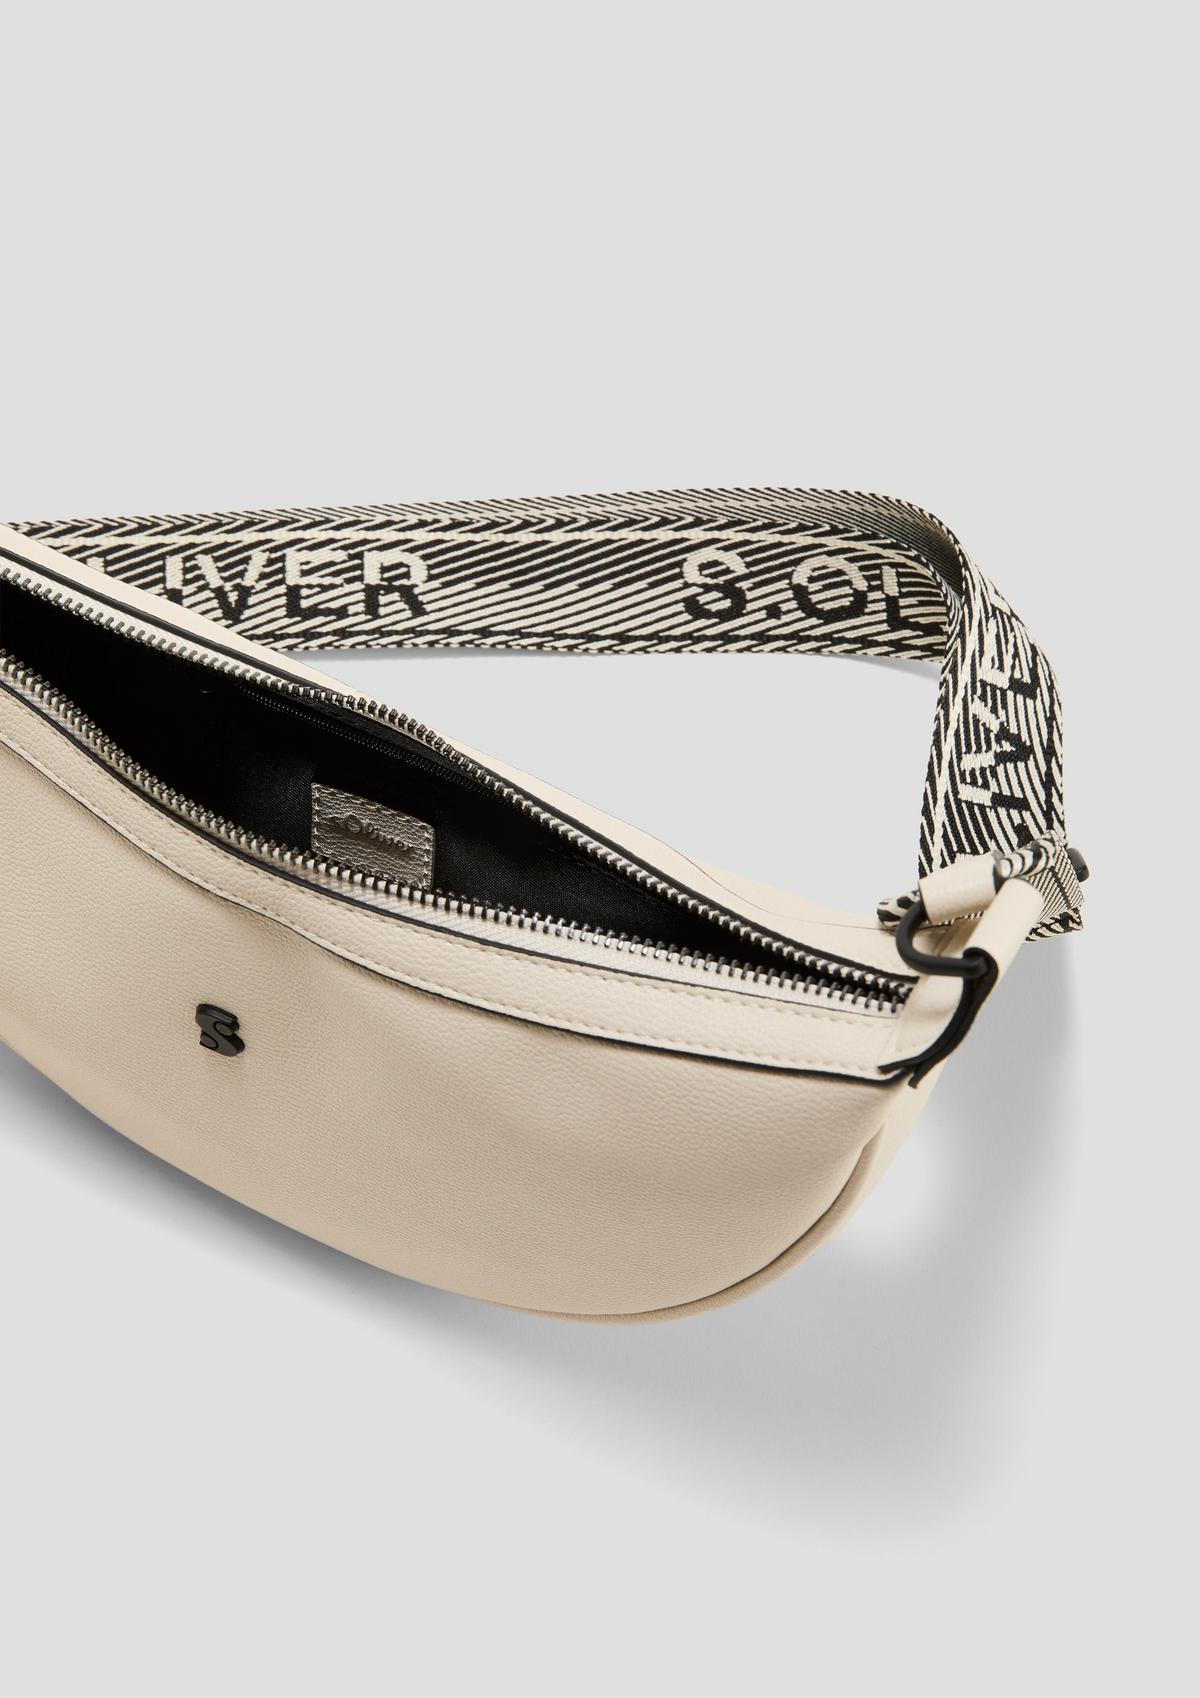 s.Oliver Cross-body bag with a logo strap